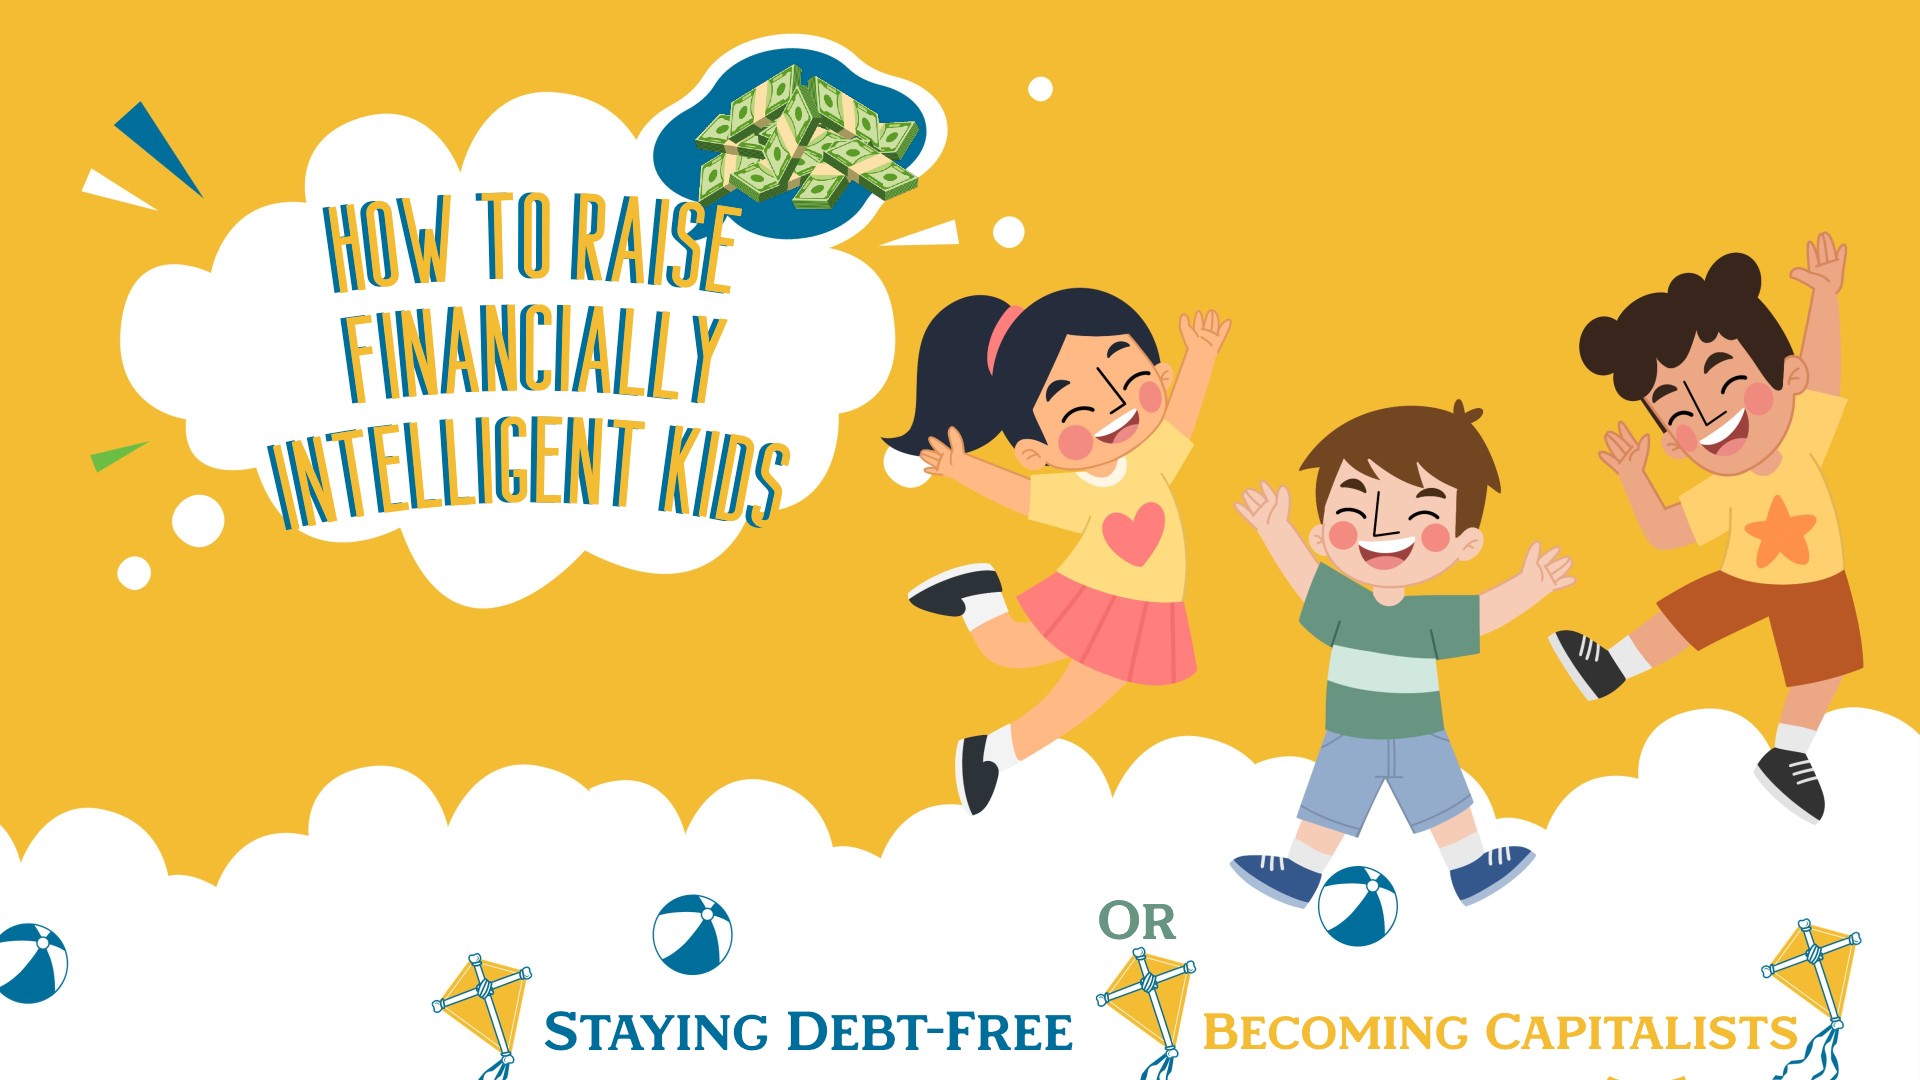 How to Raise Financially Intelligent Kids: Staying Debt-Free or Becoming Capitalists?